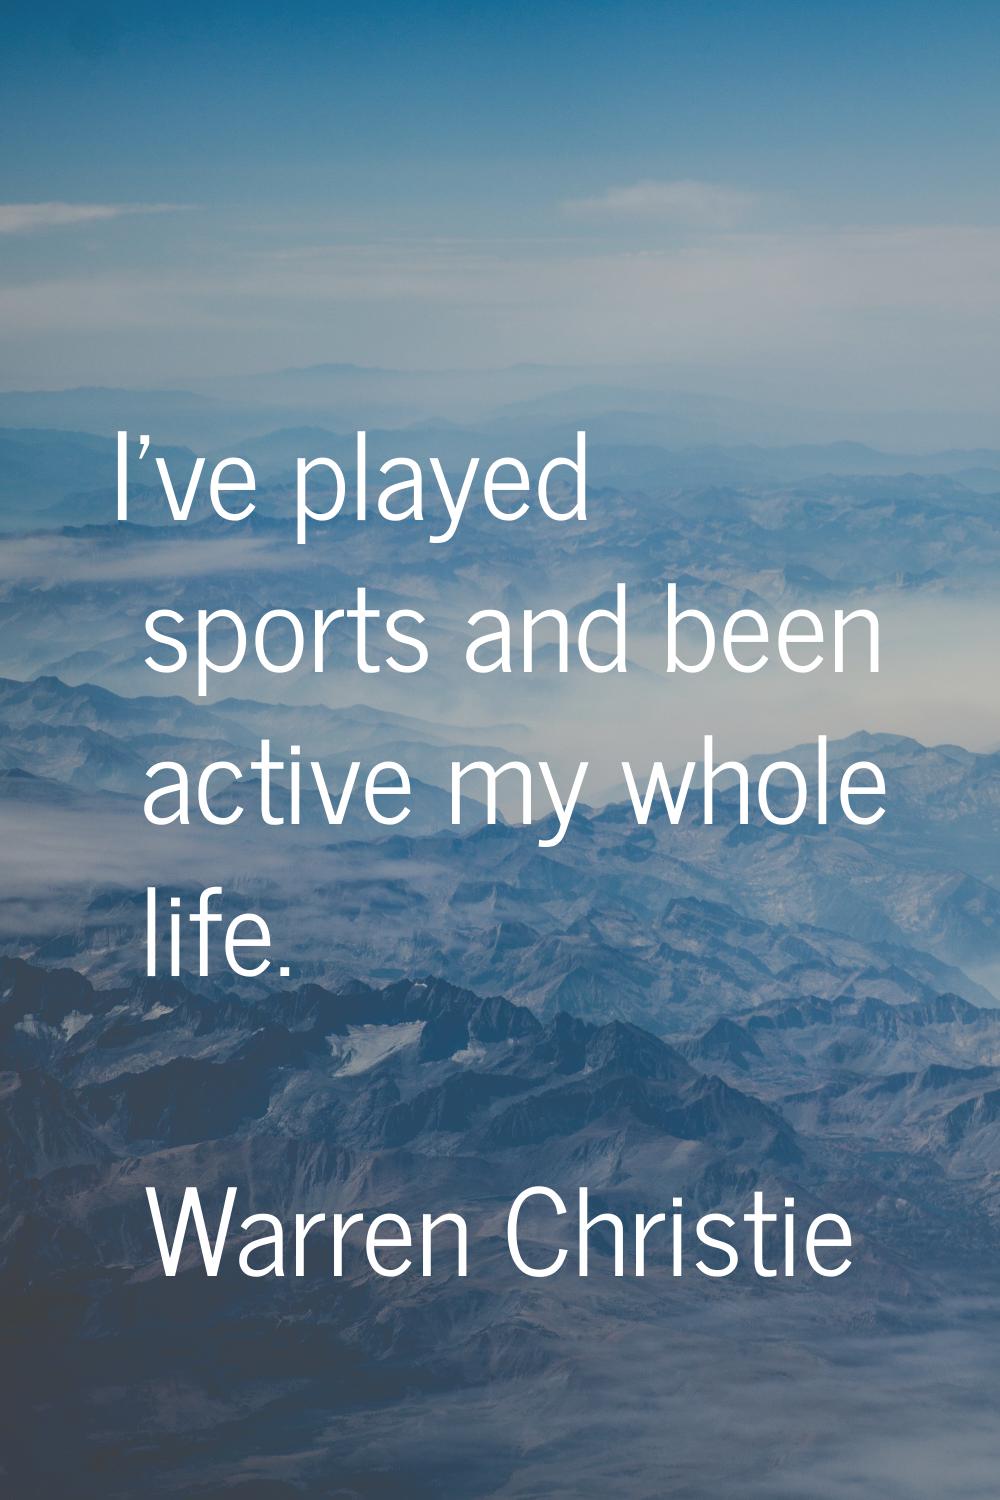 I've played sports and been active my whole life.